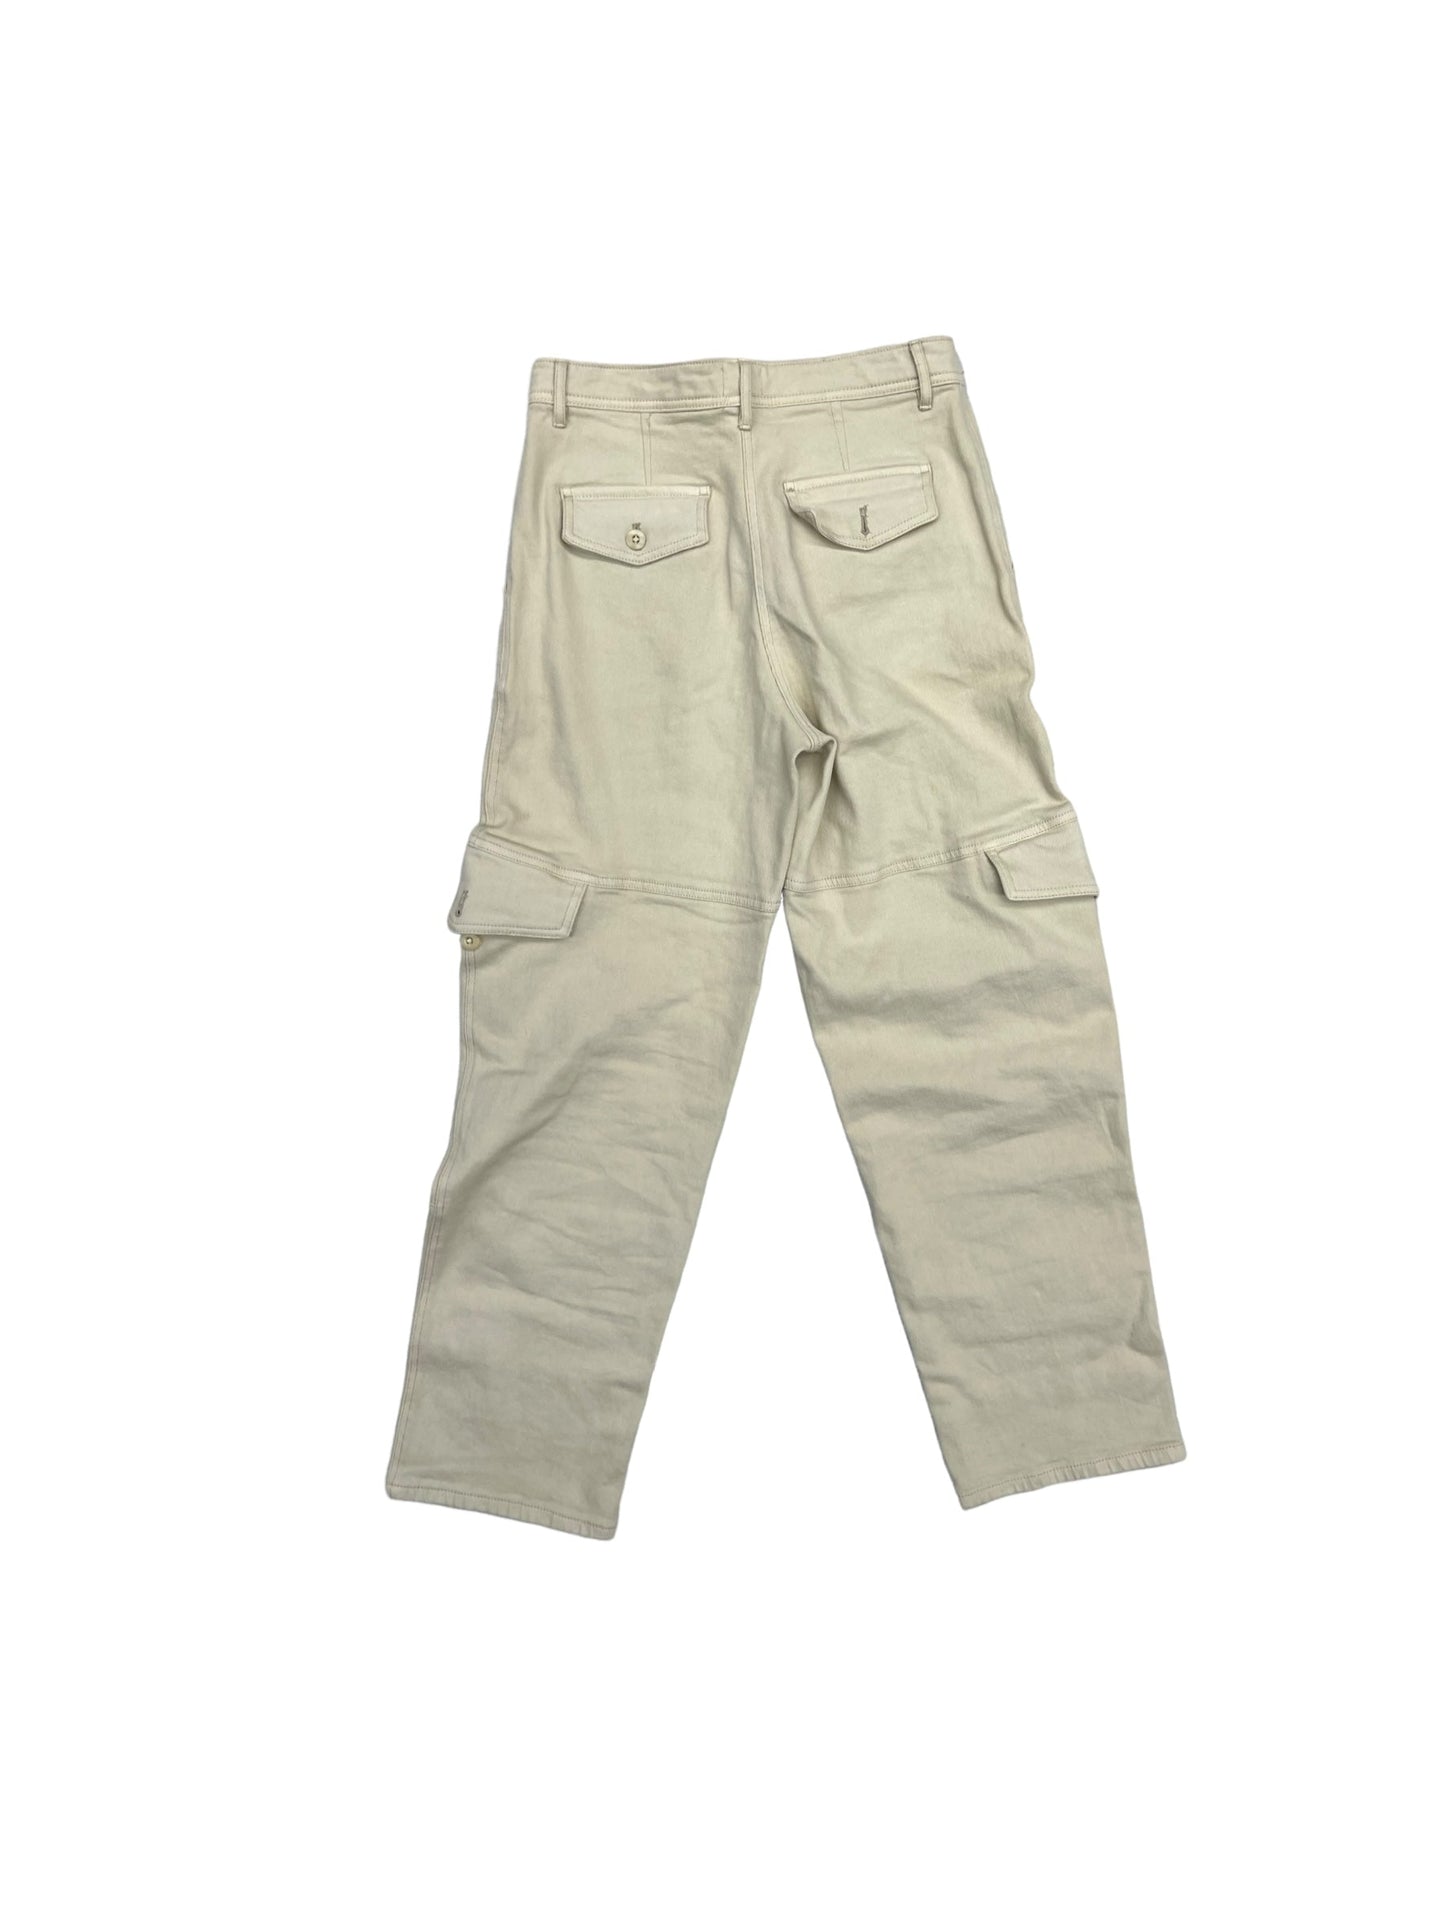 Cream Pants Cargo & Utility Wilfred, Size 8